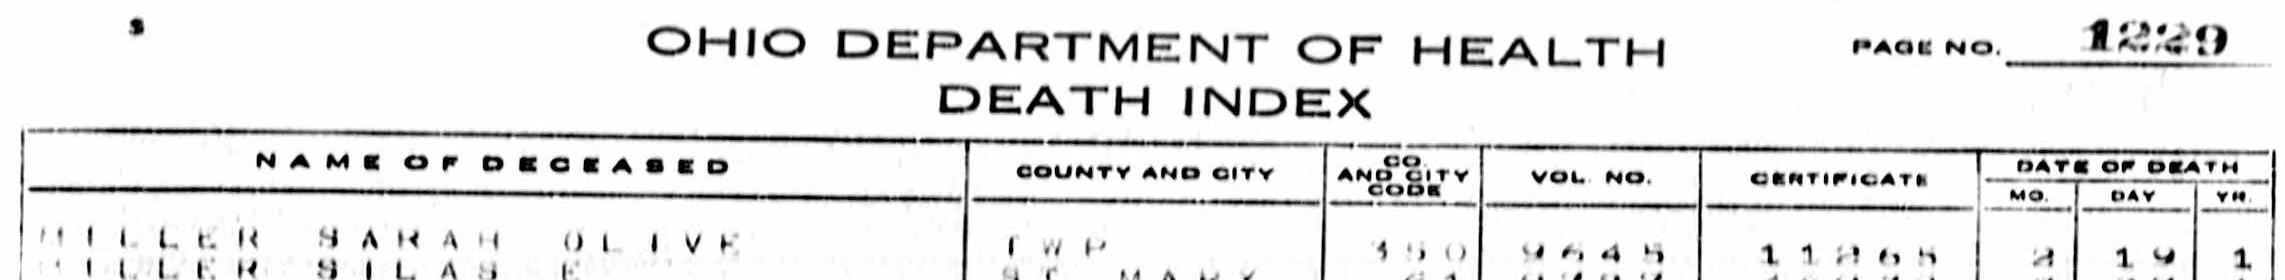 Entry for Sarah Olive Miller in Ohio death records